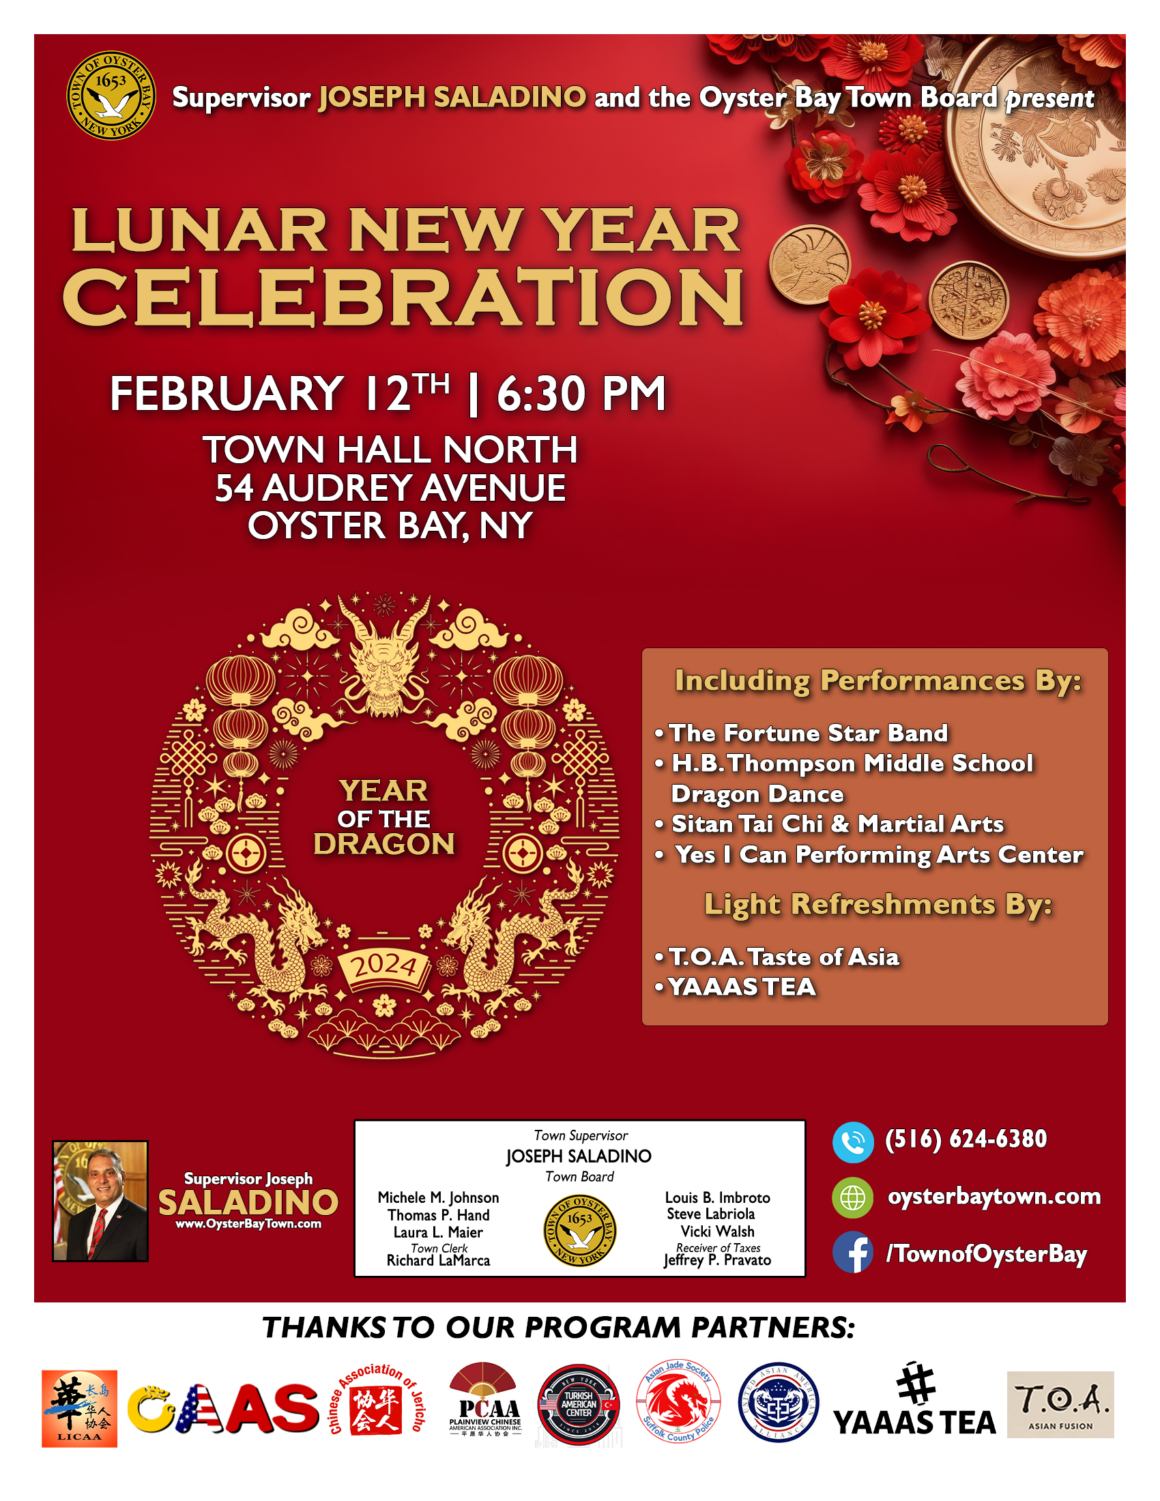 Town to Host Lunar New Year Celebration